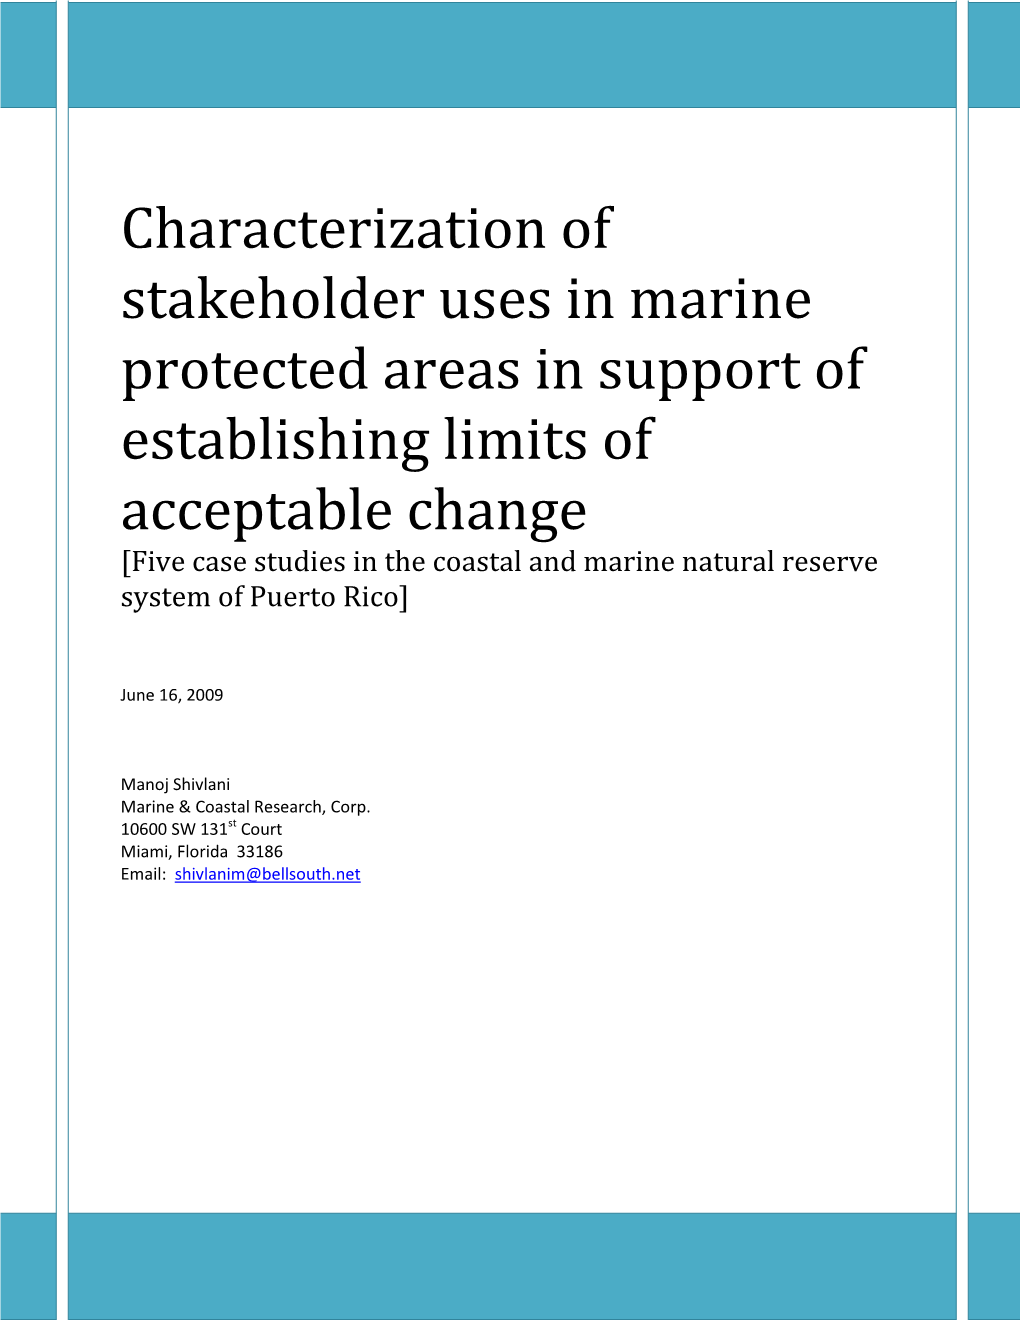 Characterization of Stakeholder Uses in Marine Protected Areas in Support of Establishing Limits of Acceptable Change